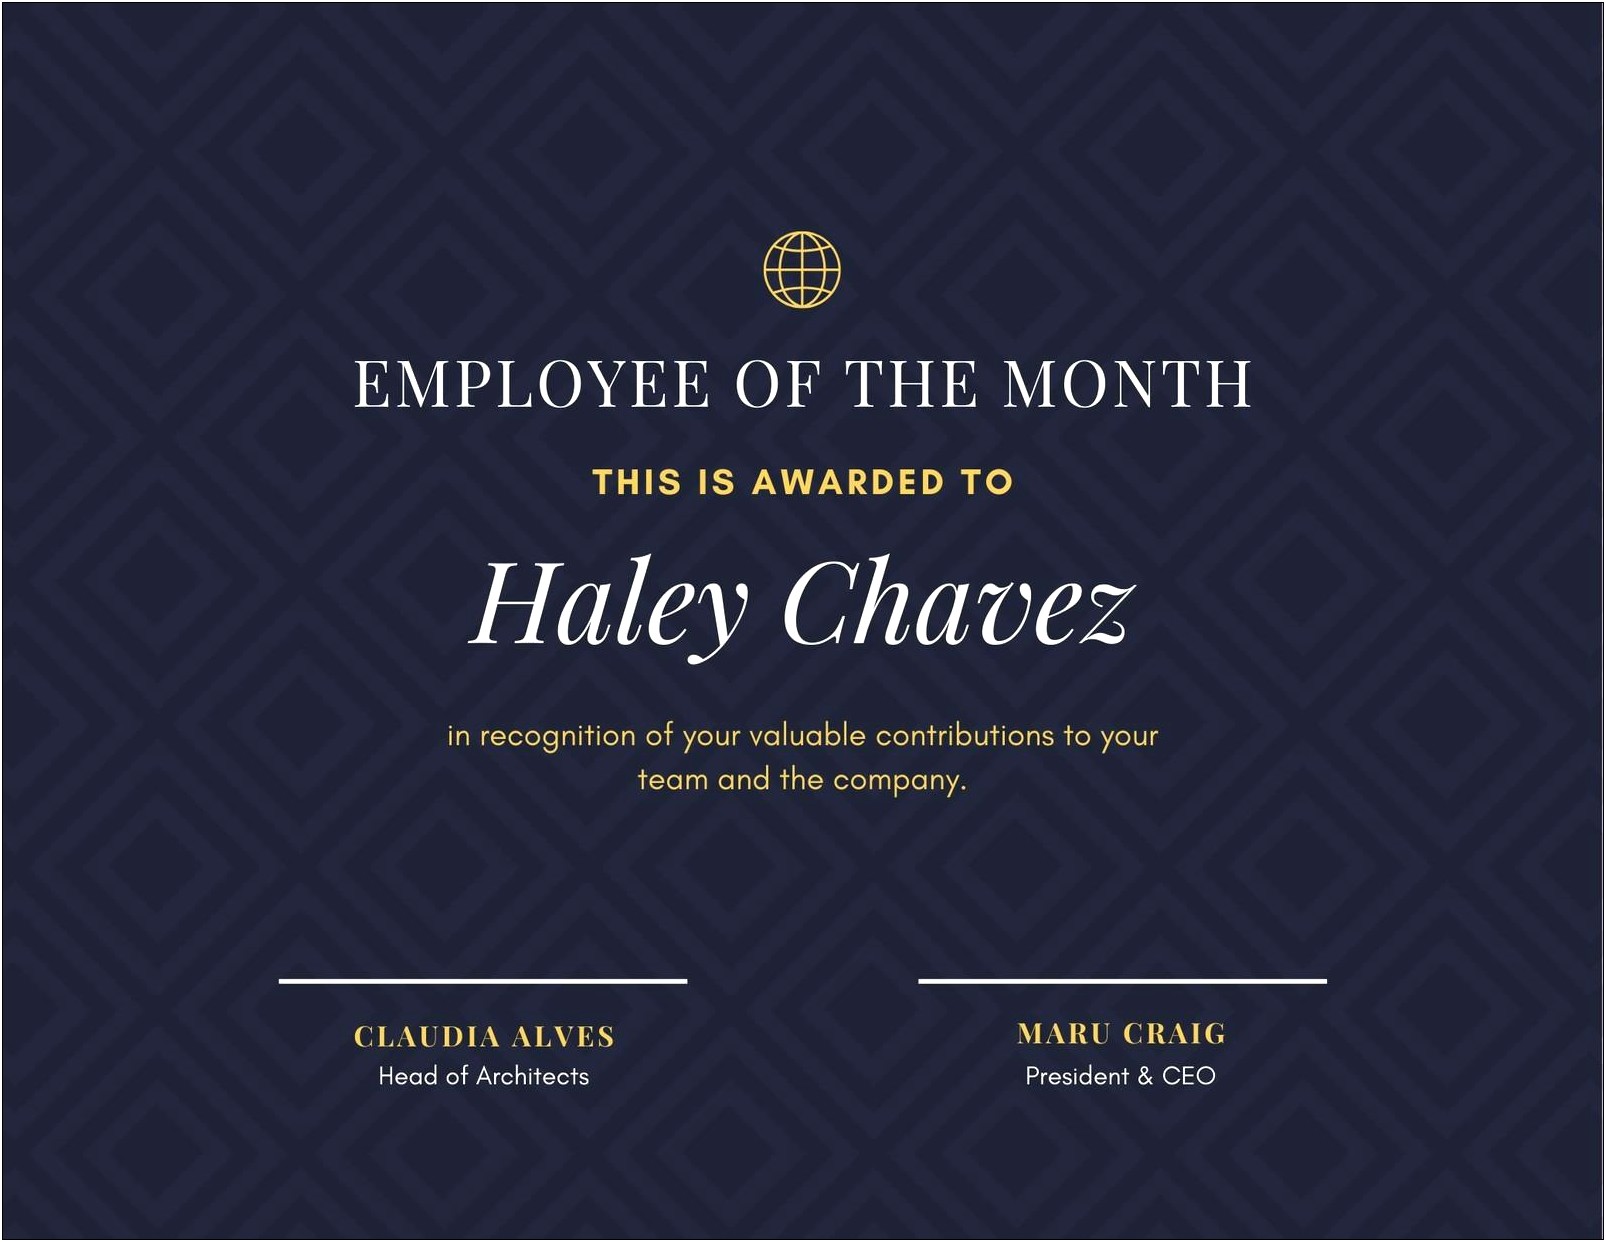 Free Printable Employee Of The Month Certificate Template